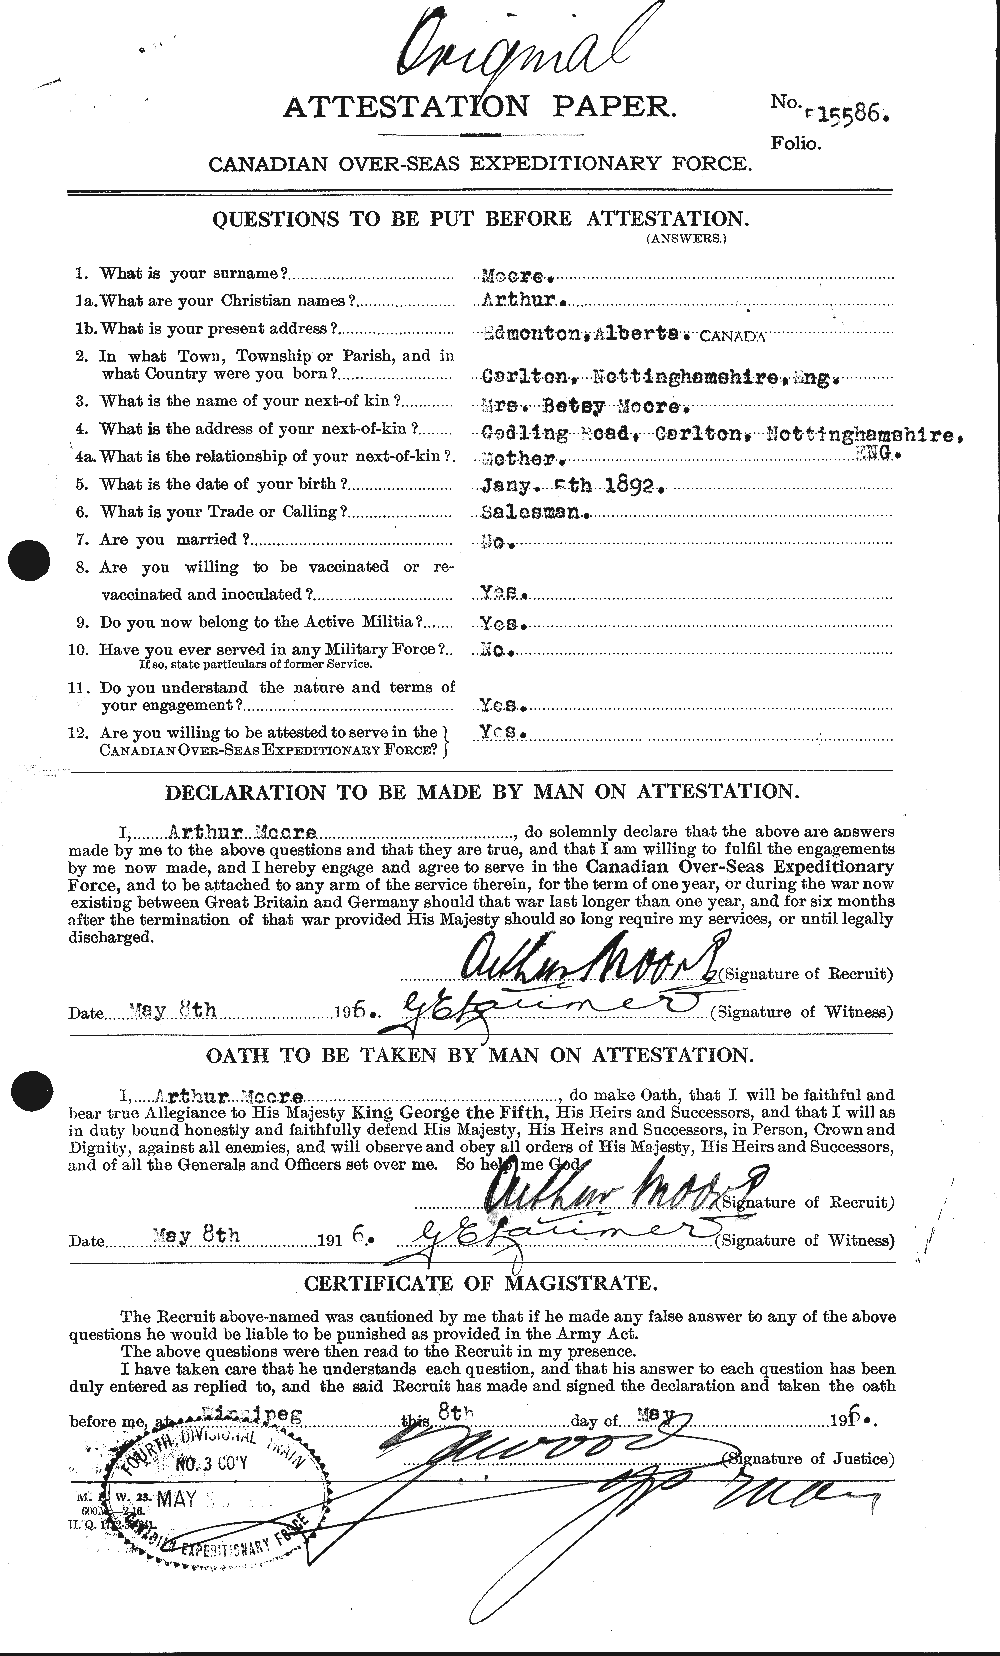 Personnel Records of the First World War - CEF 506431a